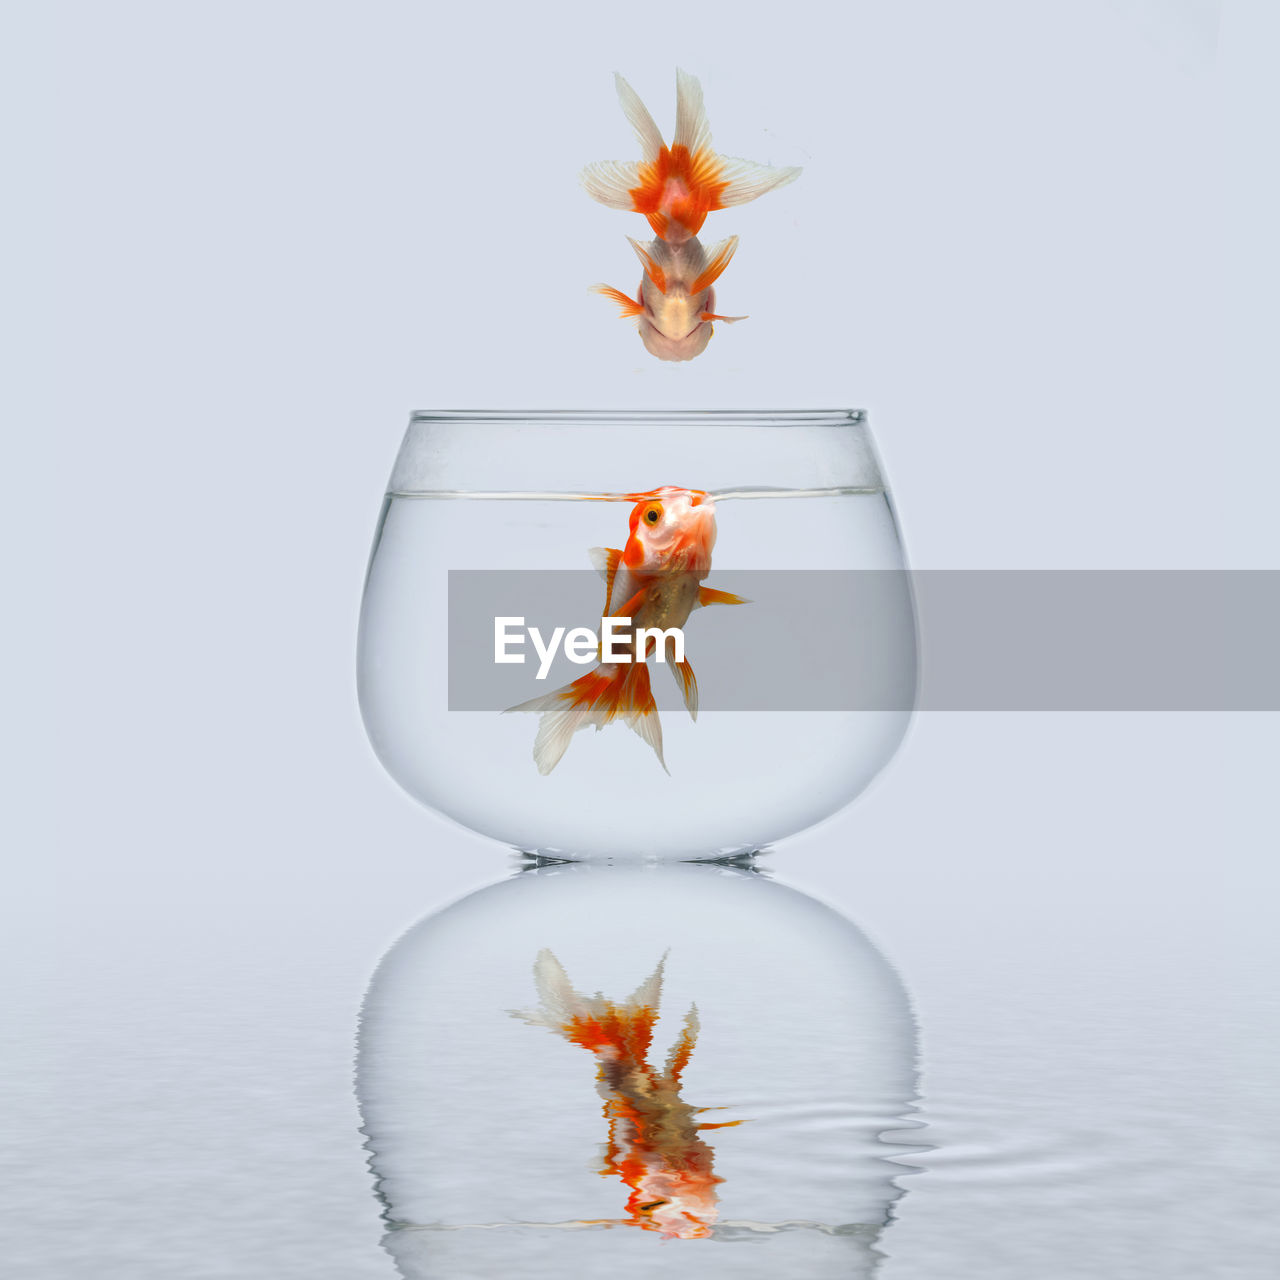 Close-up of fish swimming in fishbowl against white background